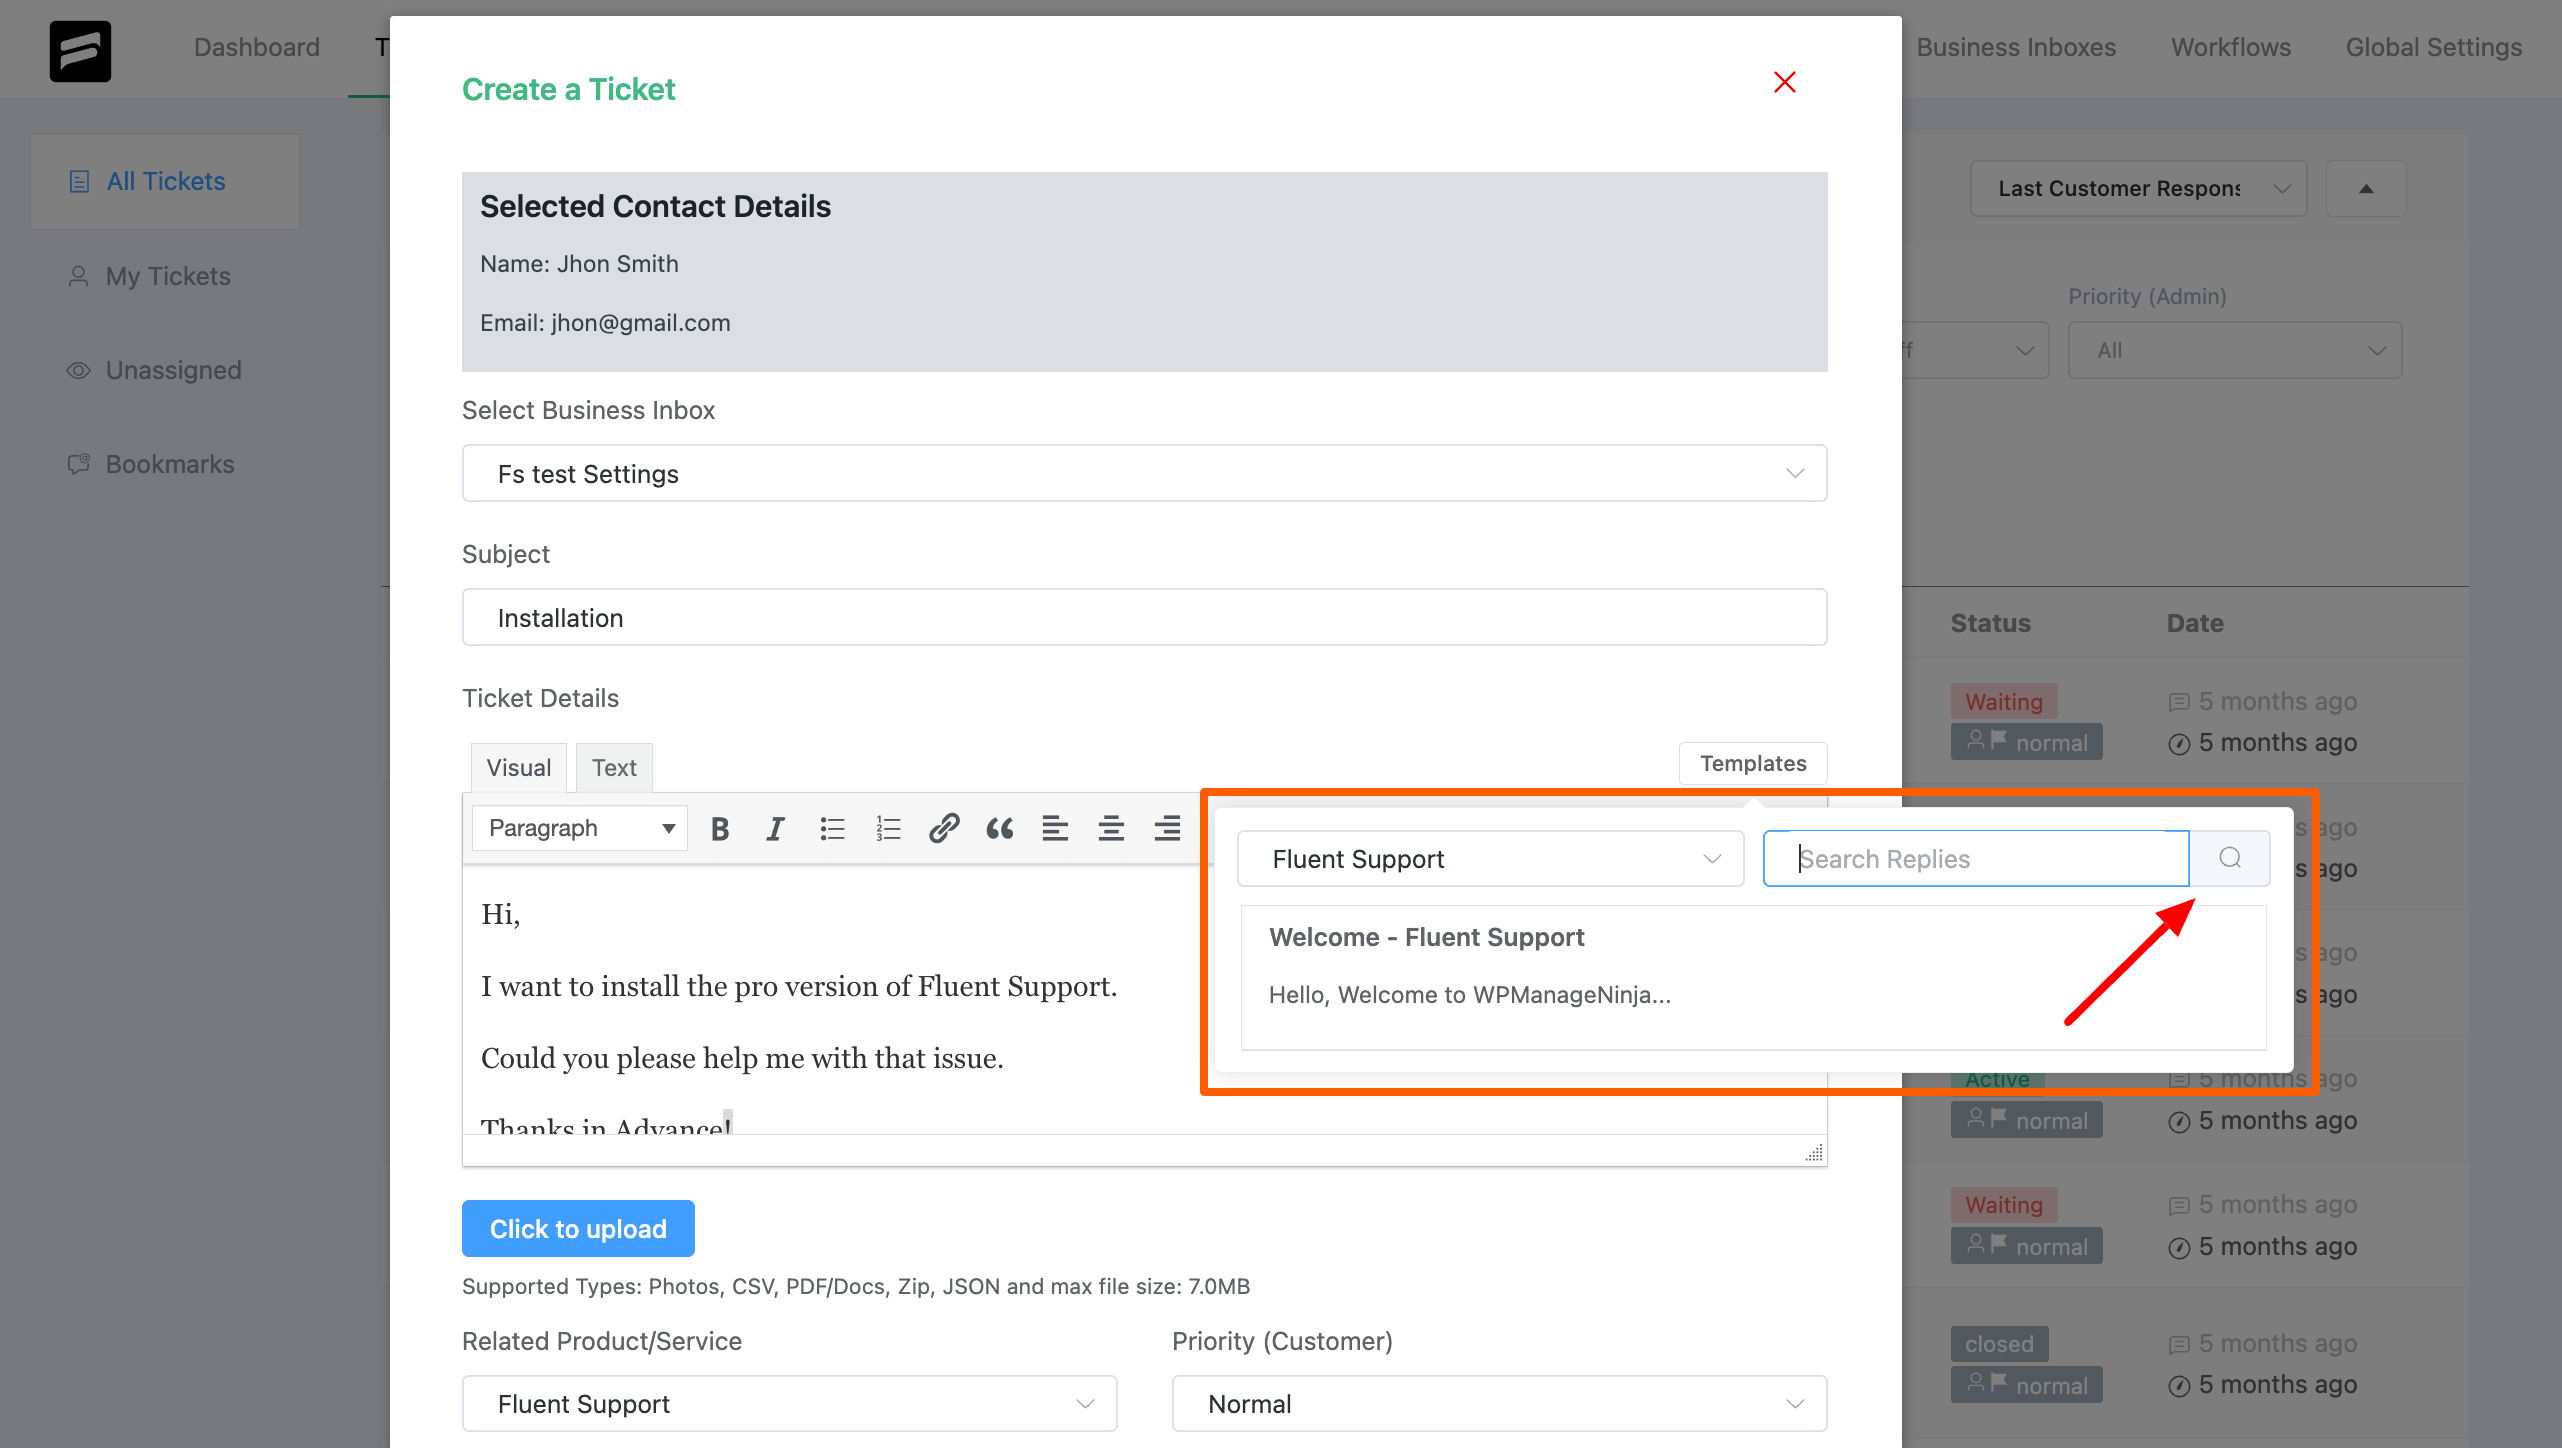 search from ticket replies and use it to create a new ticket on behalf of customer